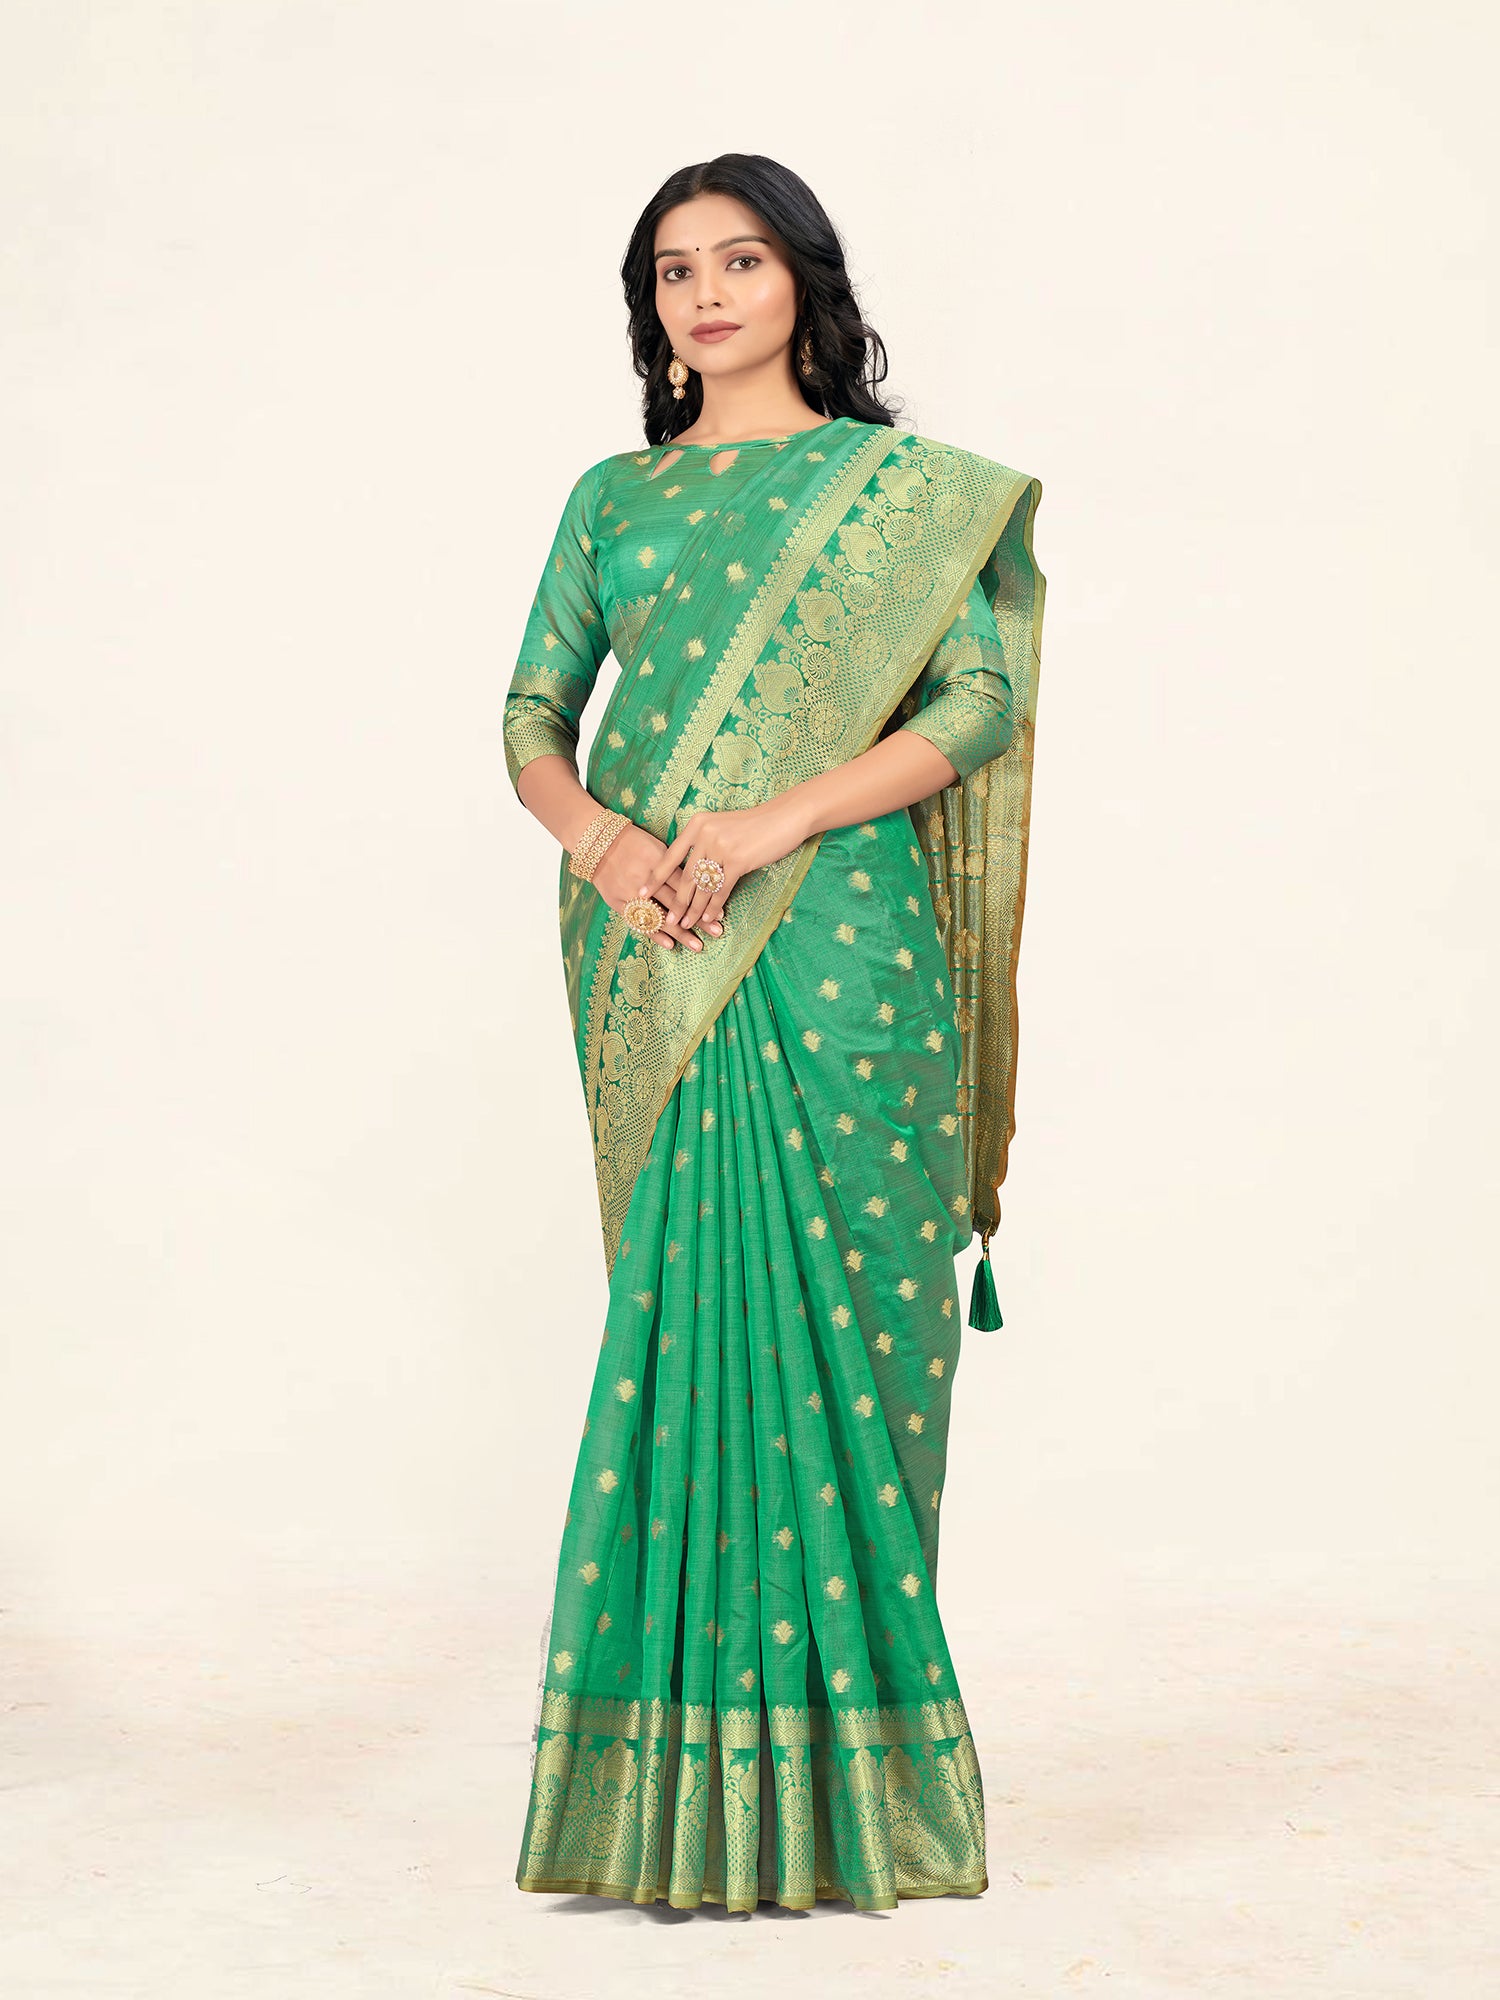 Women's Green Color Stylist Saree With Blouse - Sweet Smile